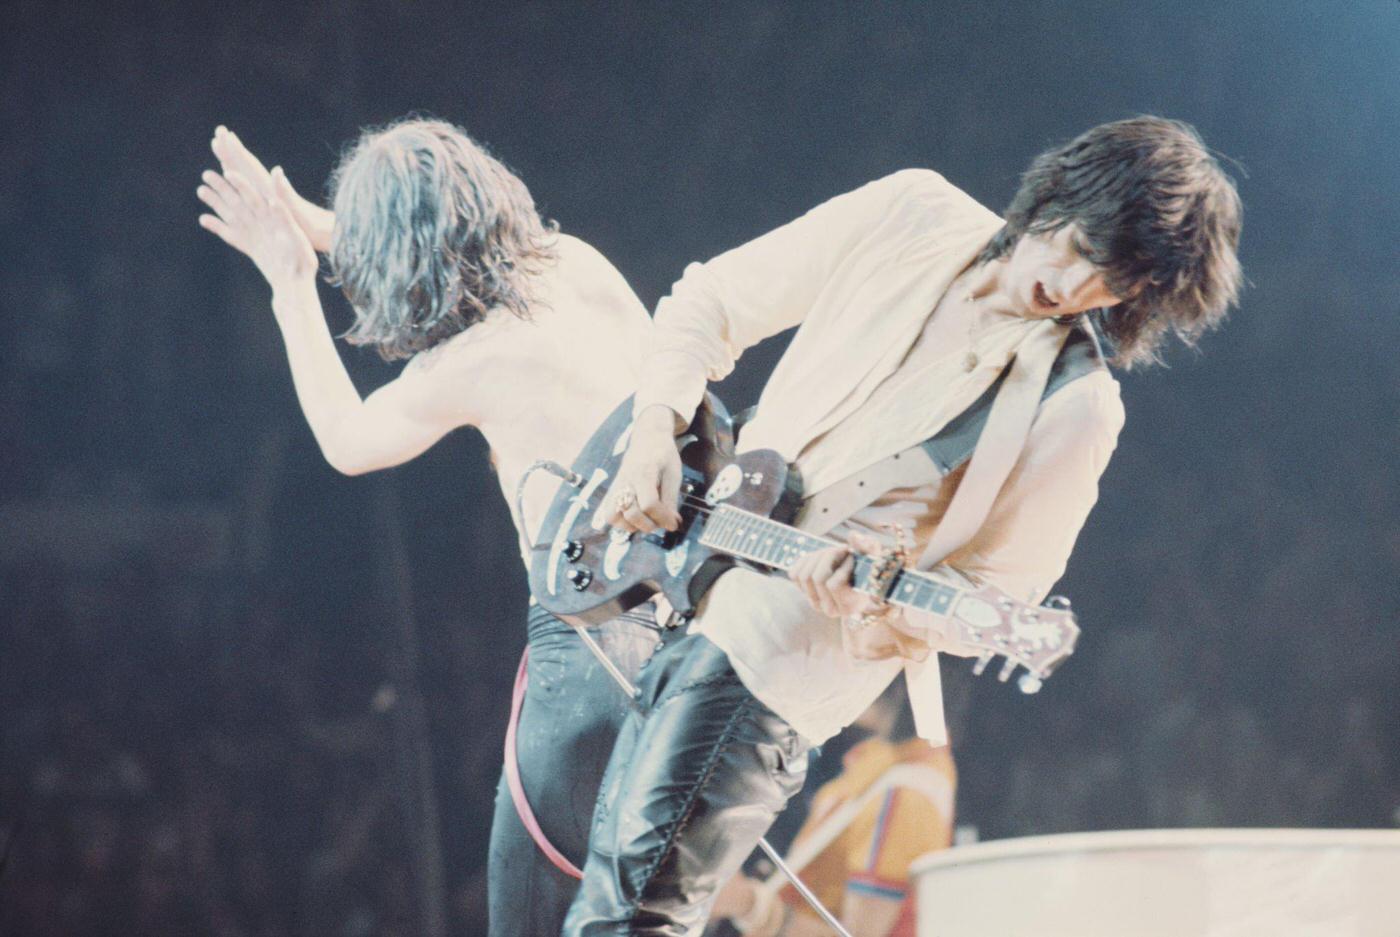 Mick Jagger and Keith Richards perform on stage during the tour, June 1975.